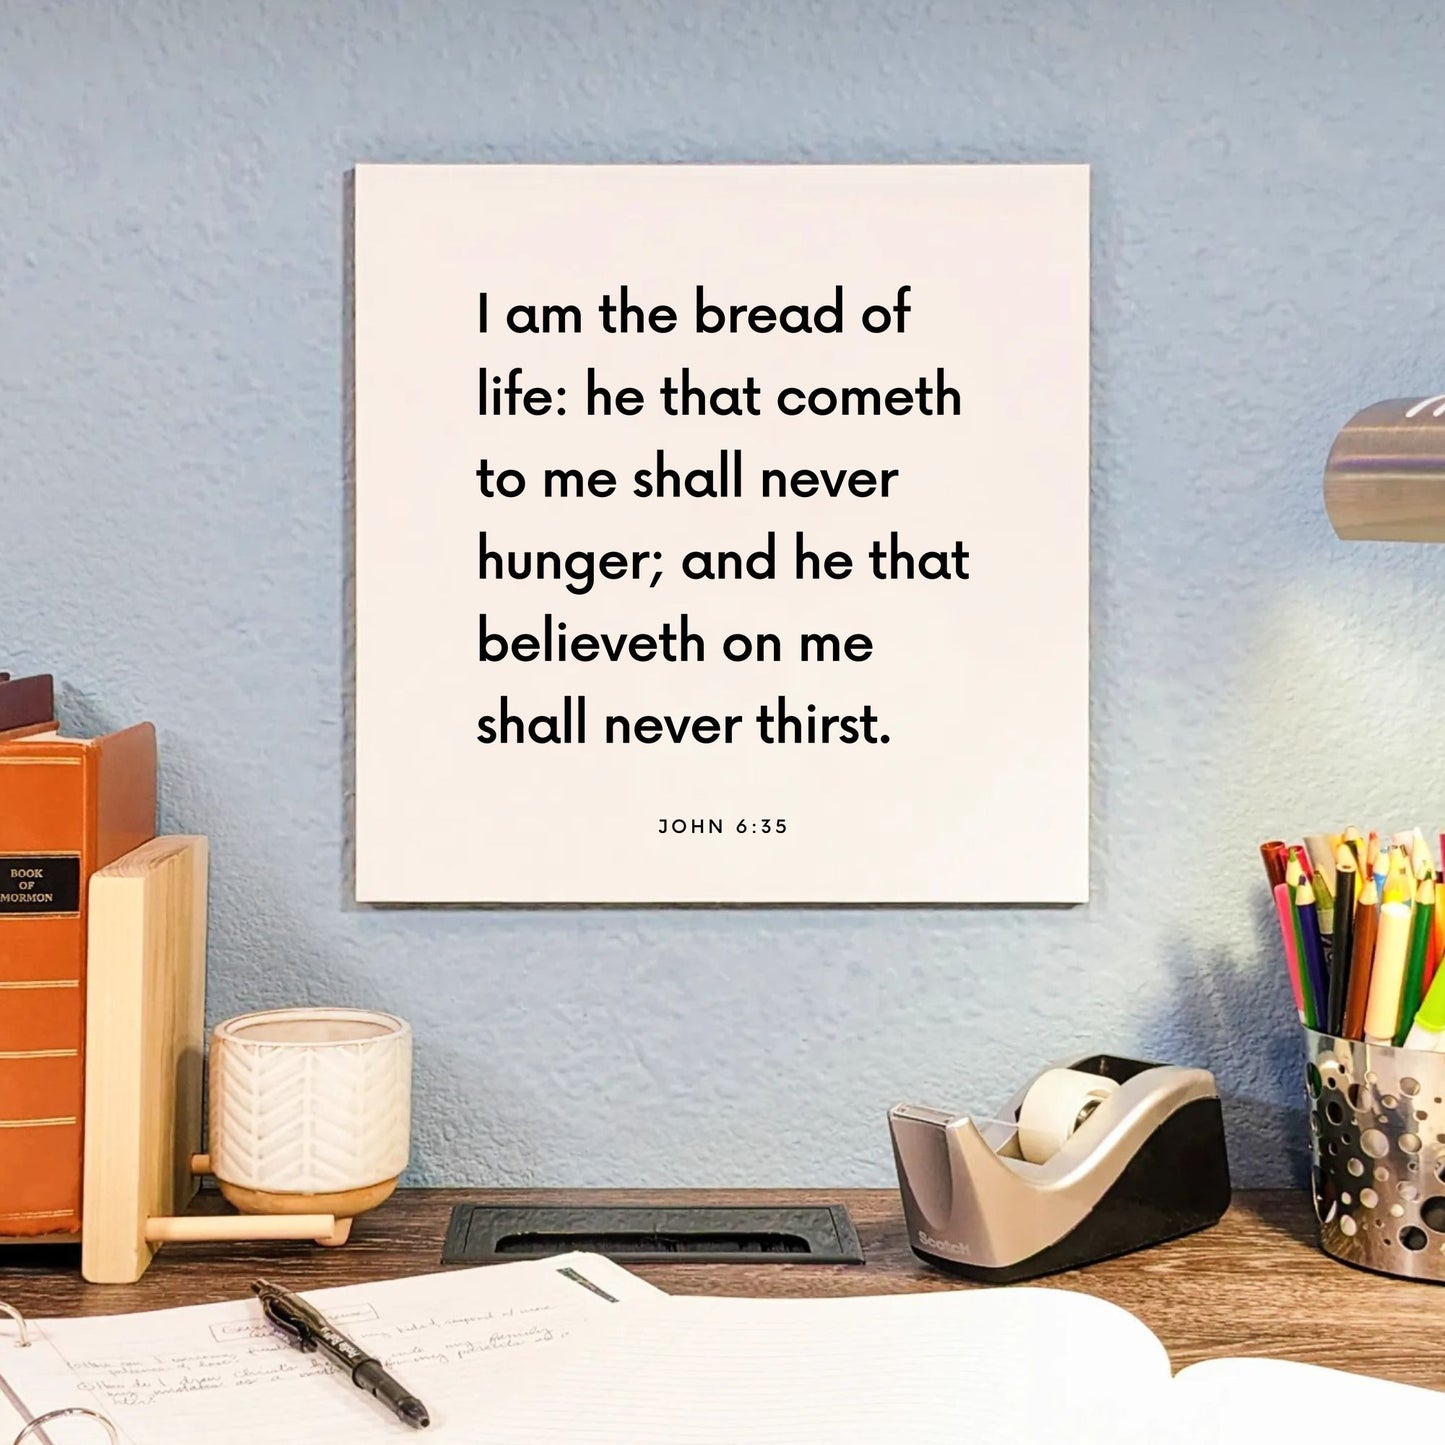 Desk mouting of the scripture tile for John 6:35 - "I am the bread of life"